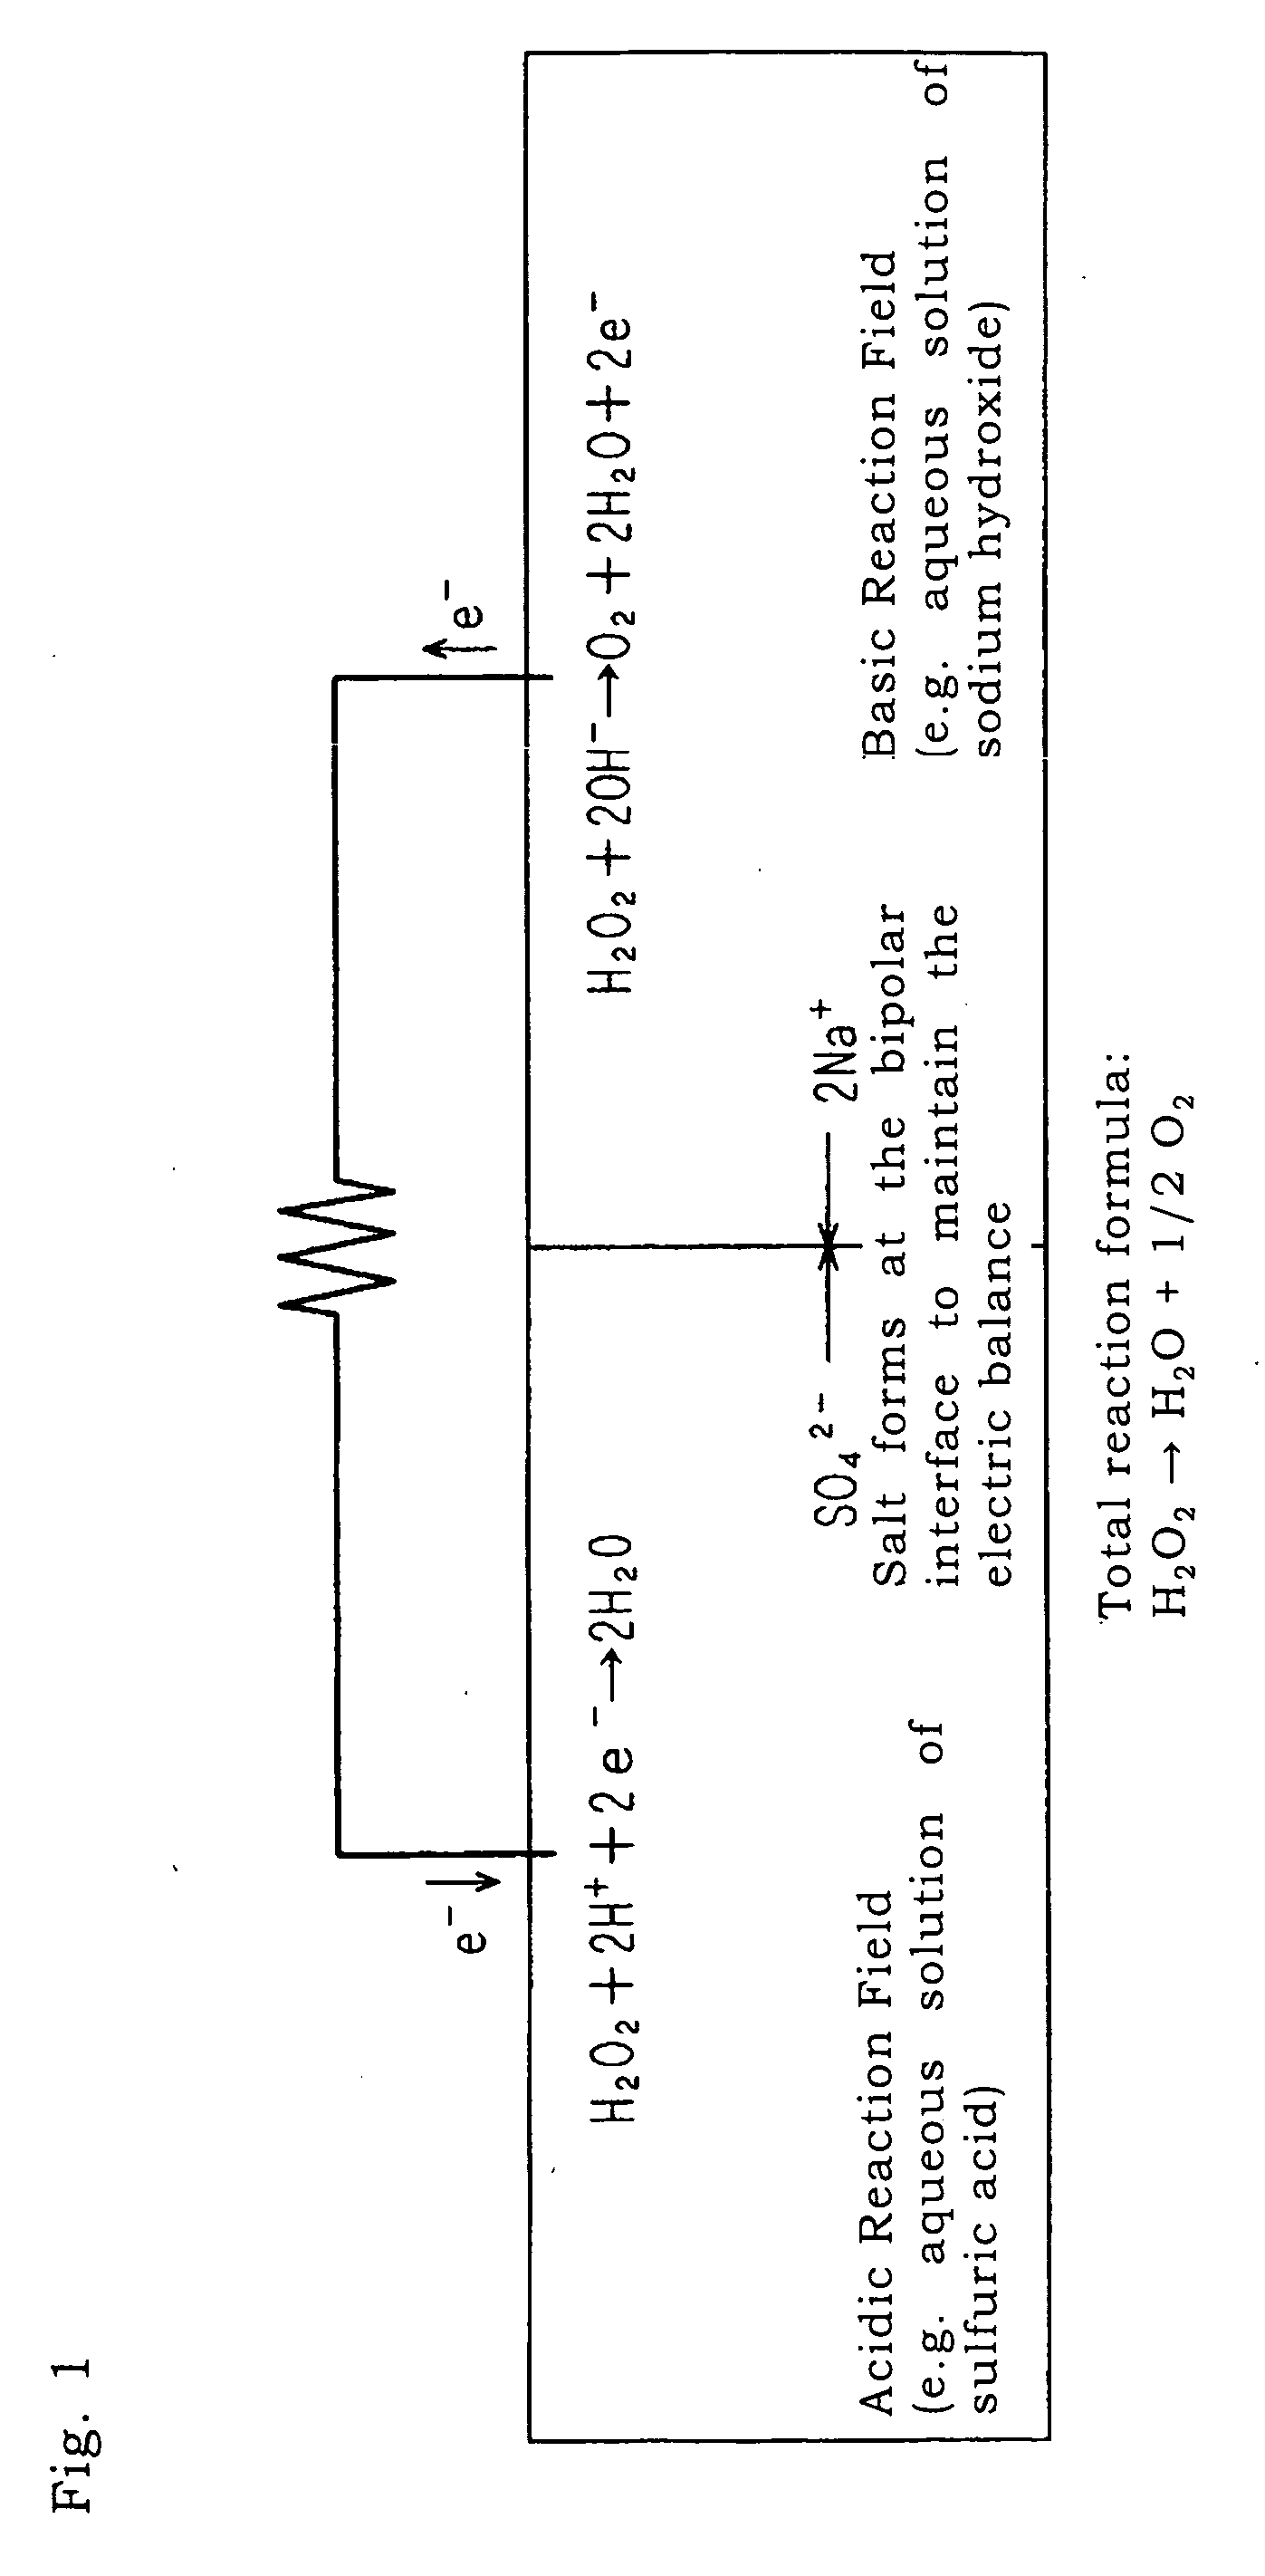 Secondary battery and method of generating electric power